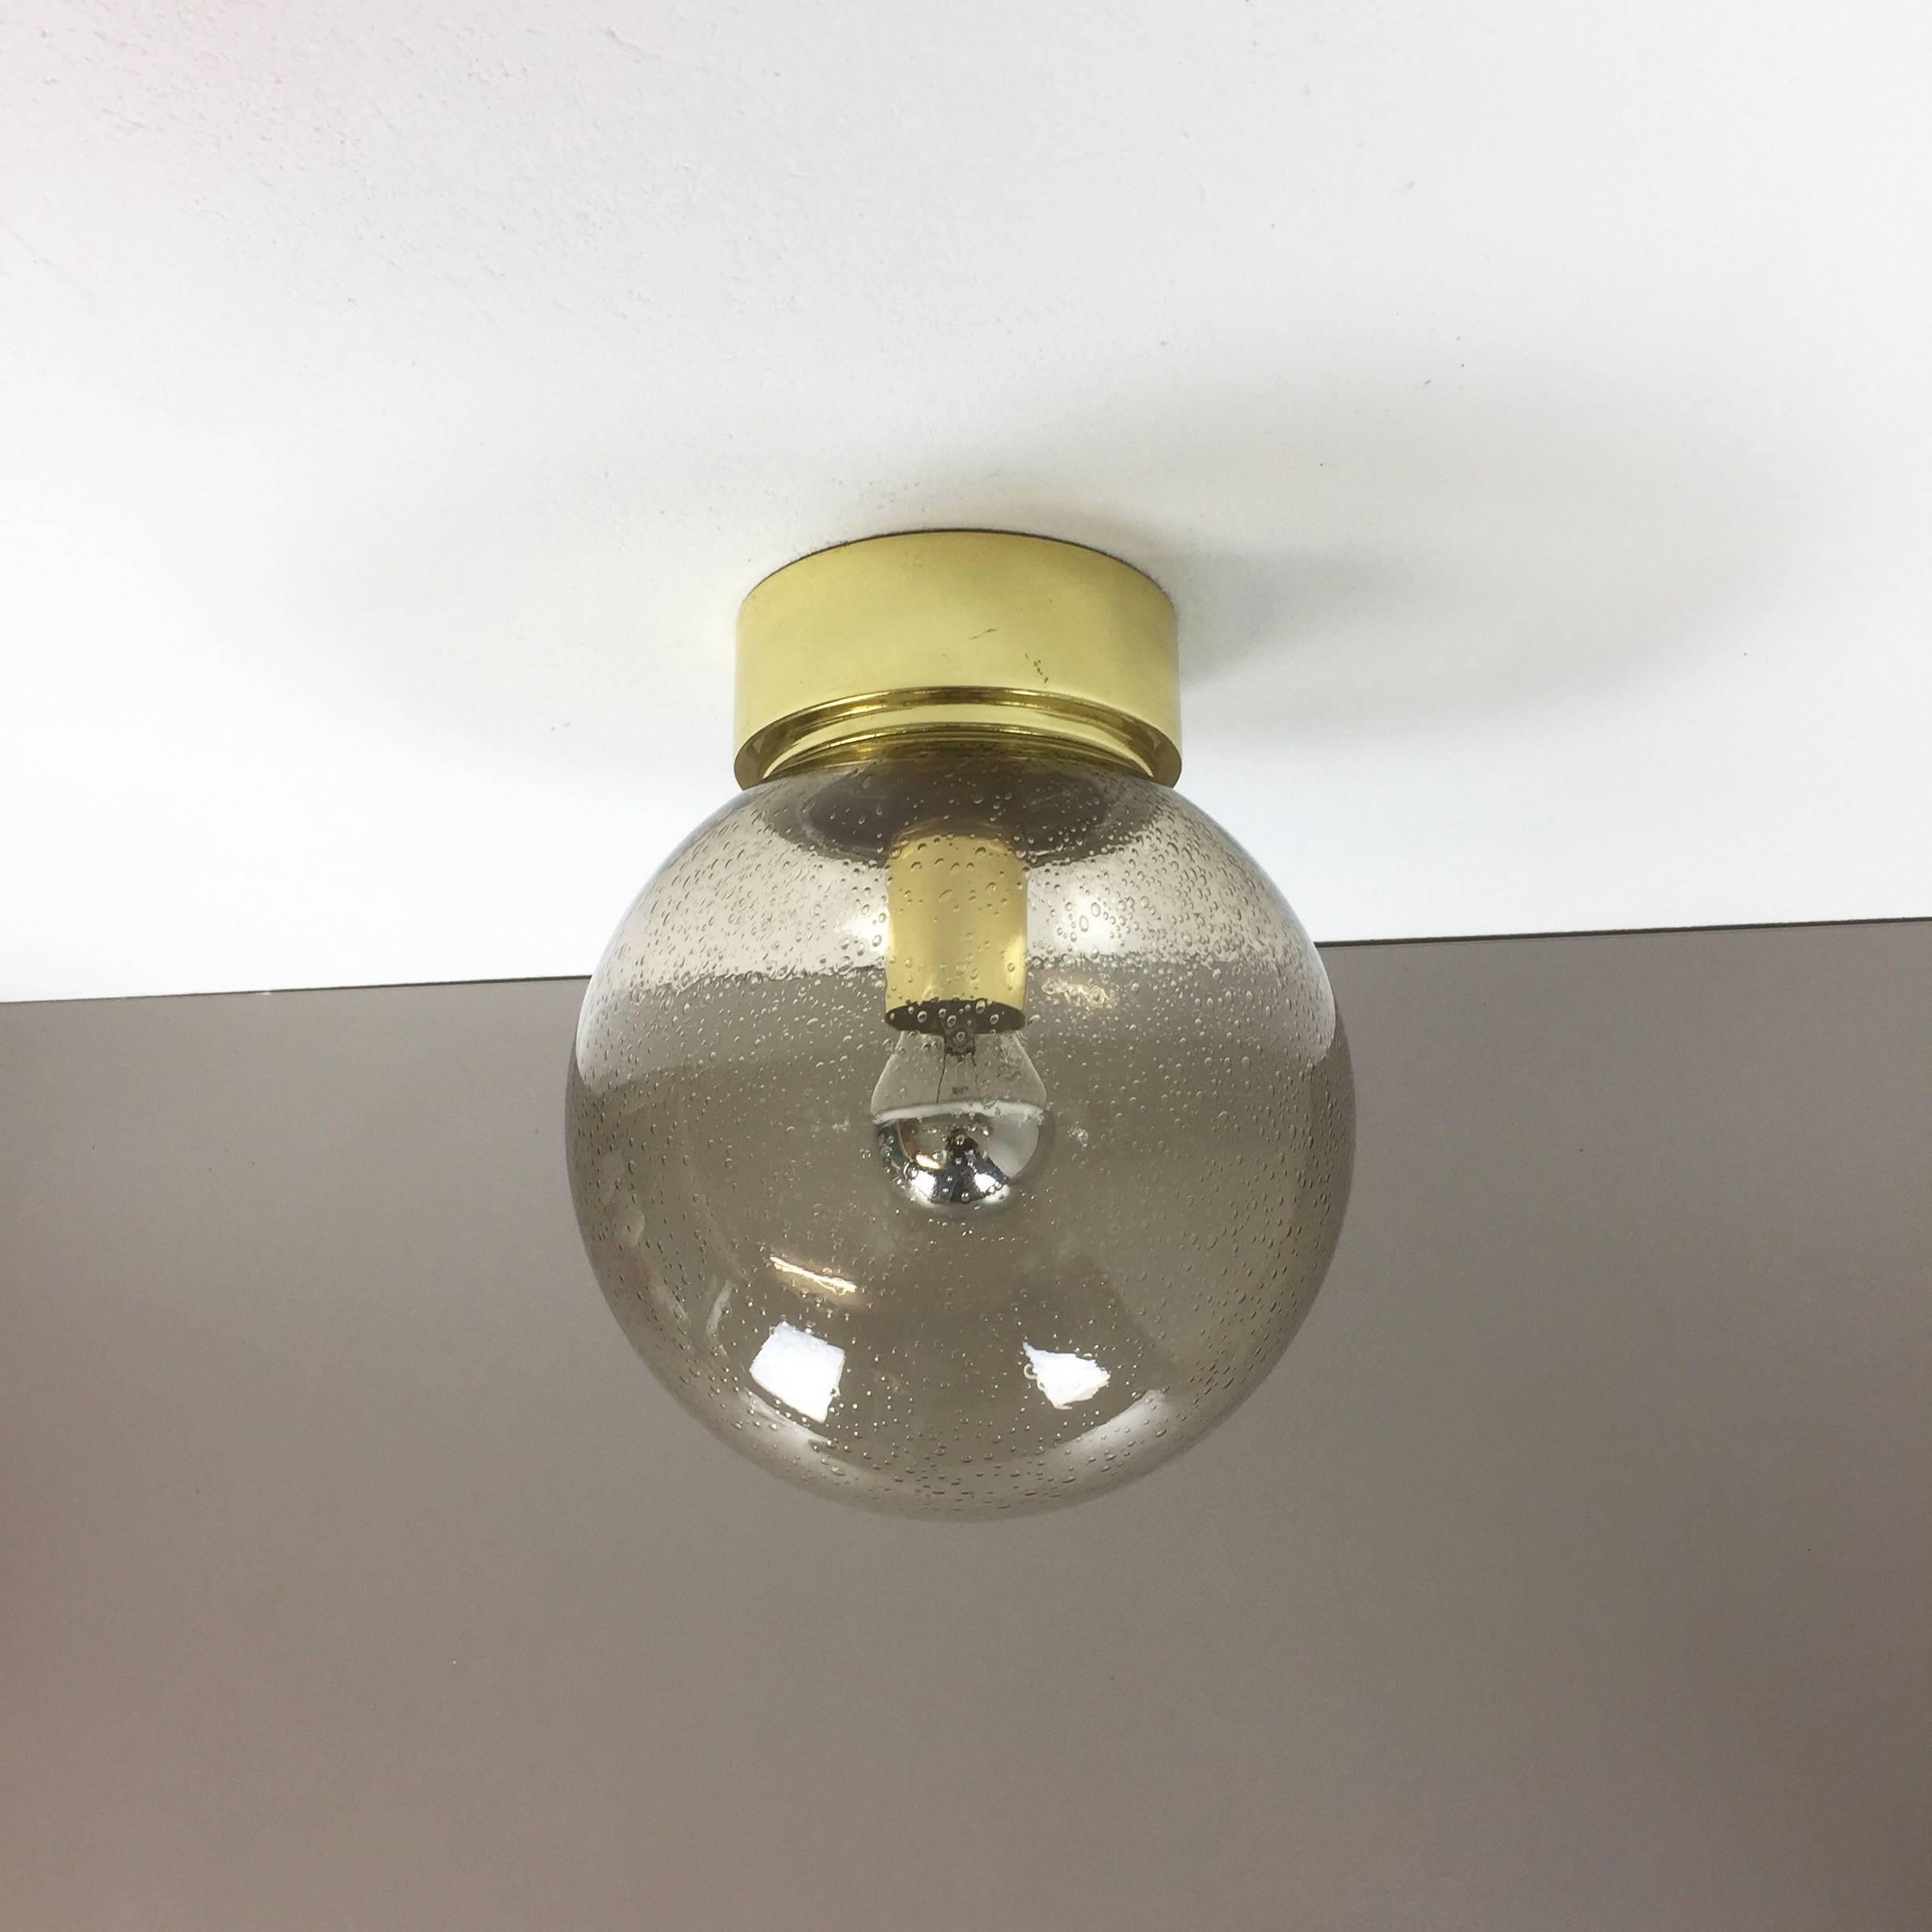 Article:

Bubble ceiling light


Producer:

Glashütte Limburg, Germany



Origin:

Germany



Age:

1970s




Description:

Original 1970s modernist German Light made of high quality glass in ball form with a solid metal